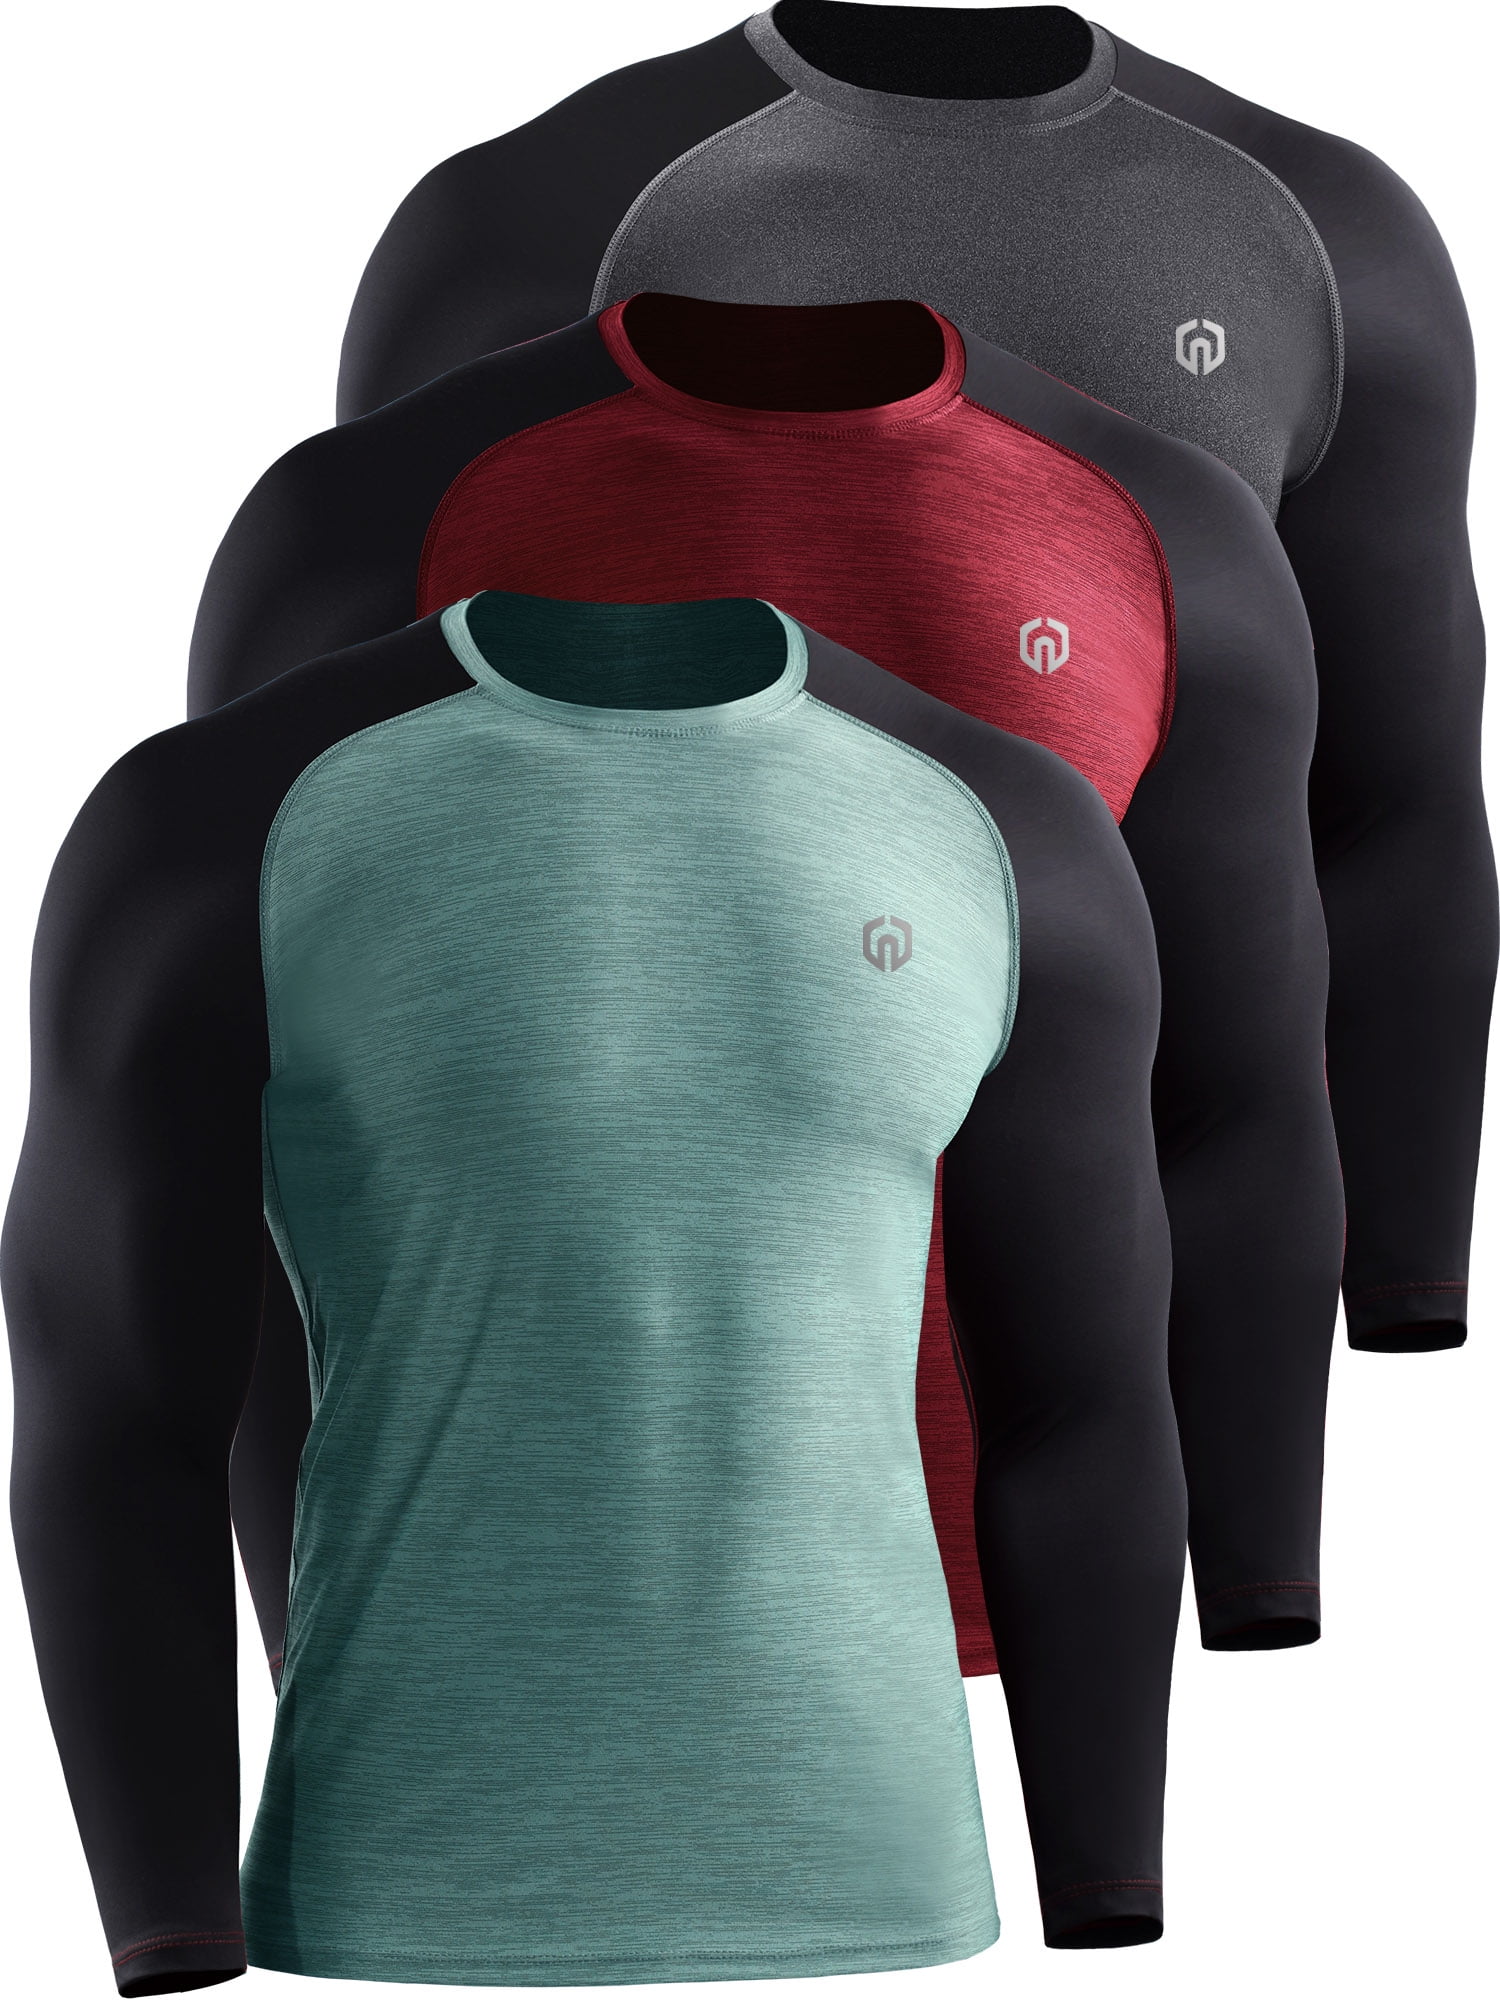 NELEUS Mens Dry Fit Long Sleeve Athletic Workout Shirts 3 Pack,Dark  Gray+Red+Light Green,US Size 2XL 